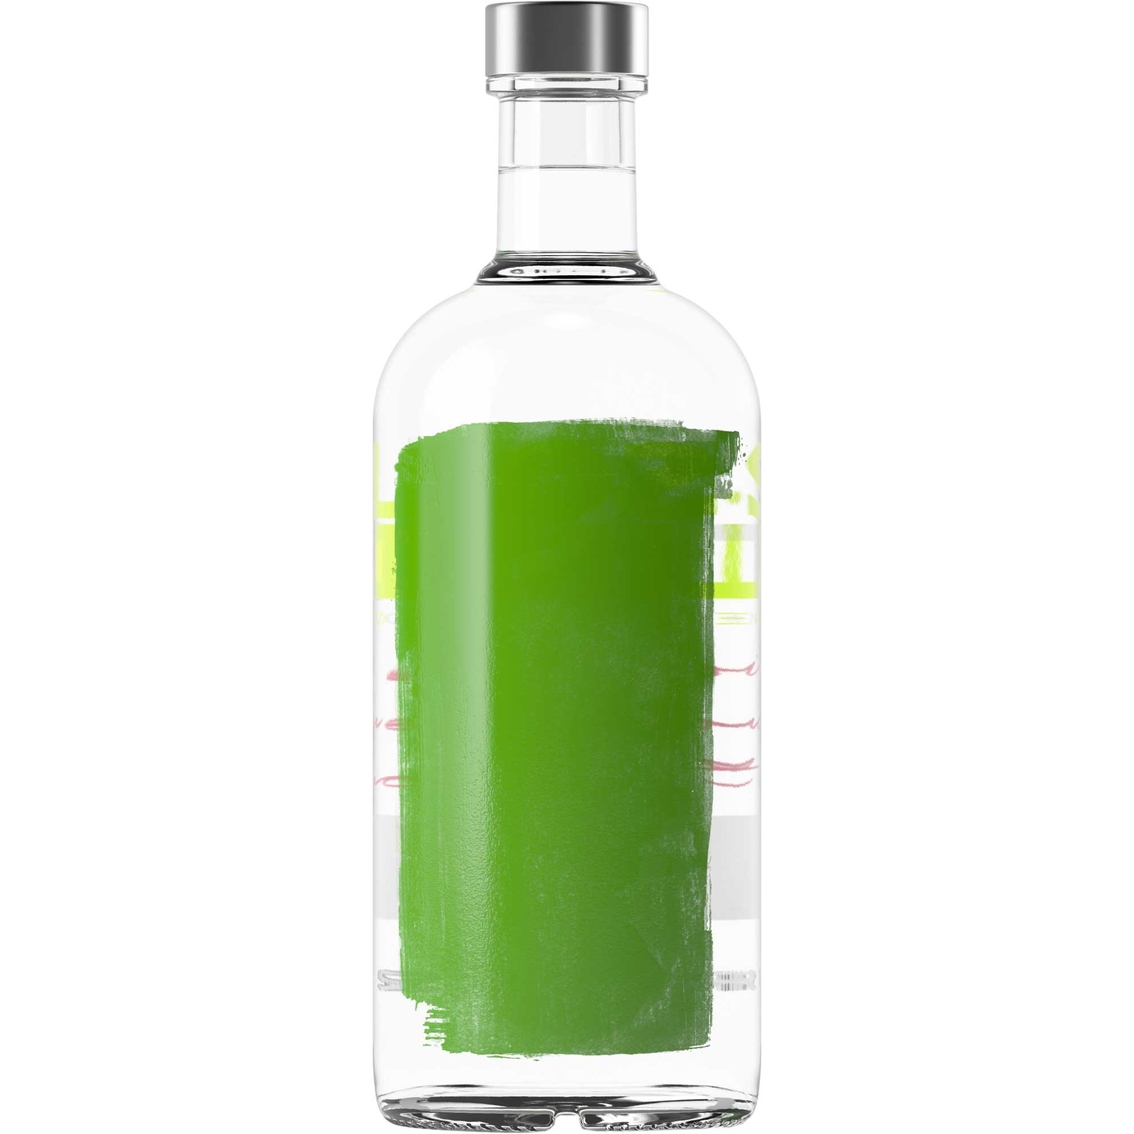 Absolut Lime Vodka 750ml - Image 2 of 2